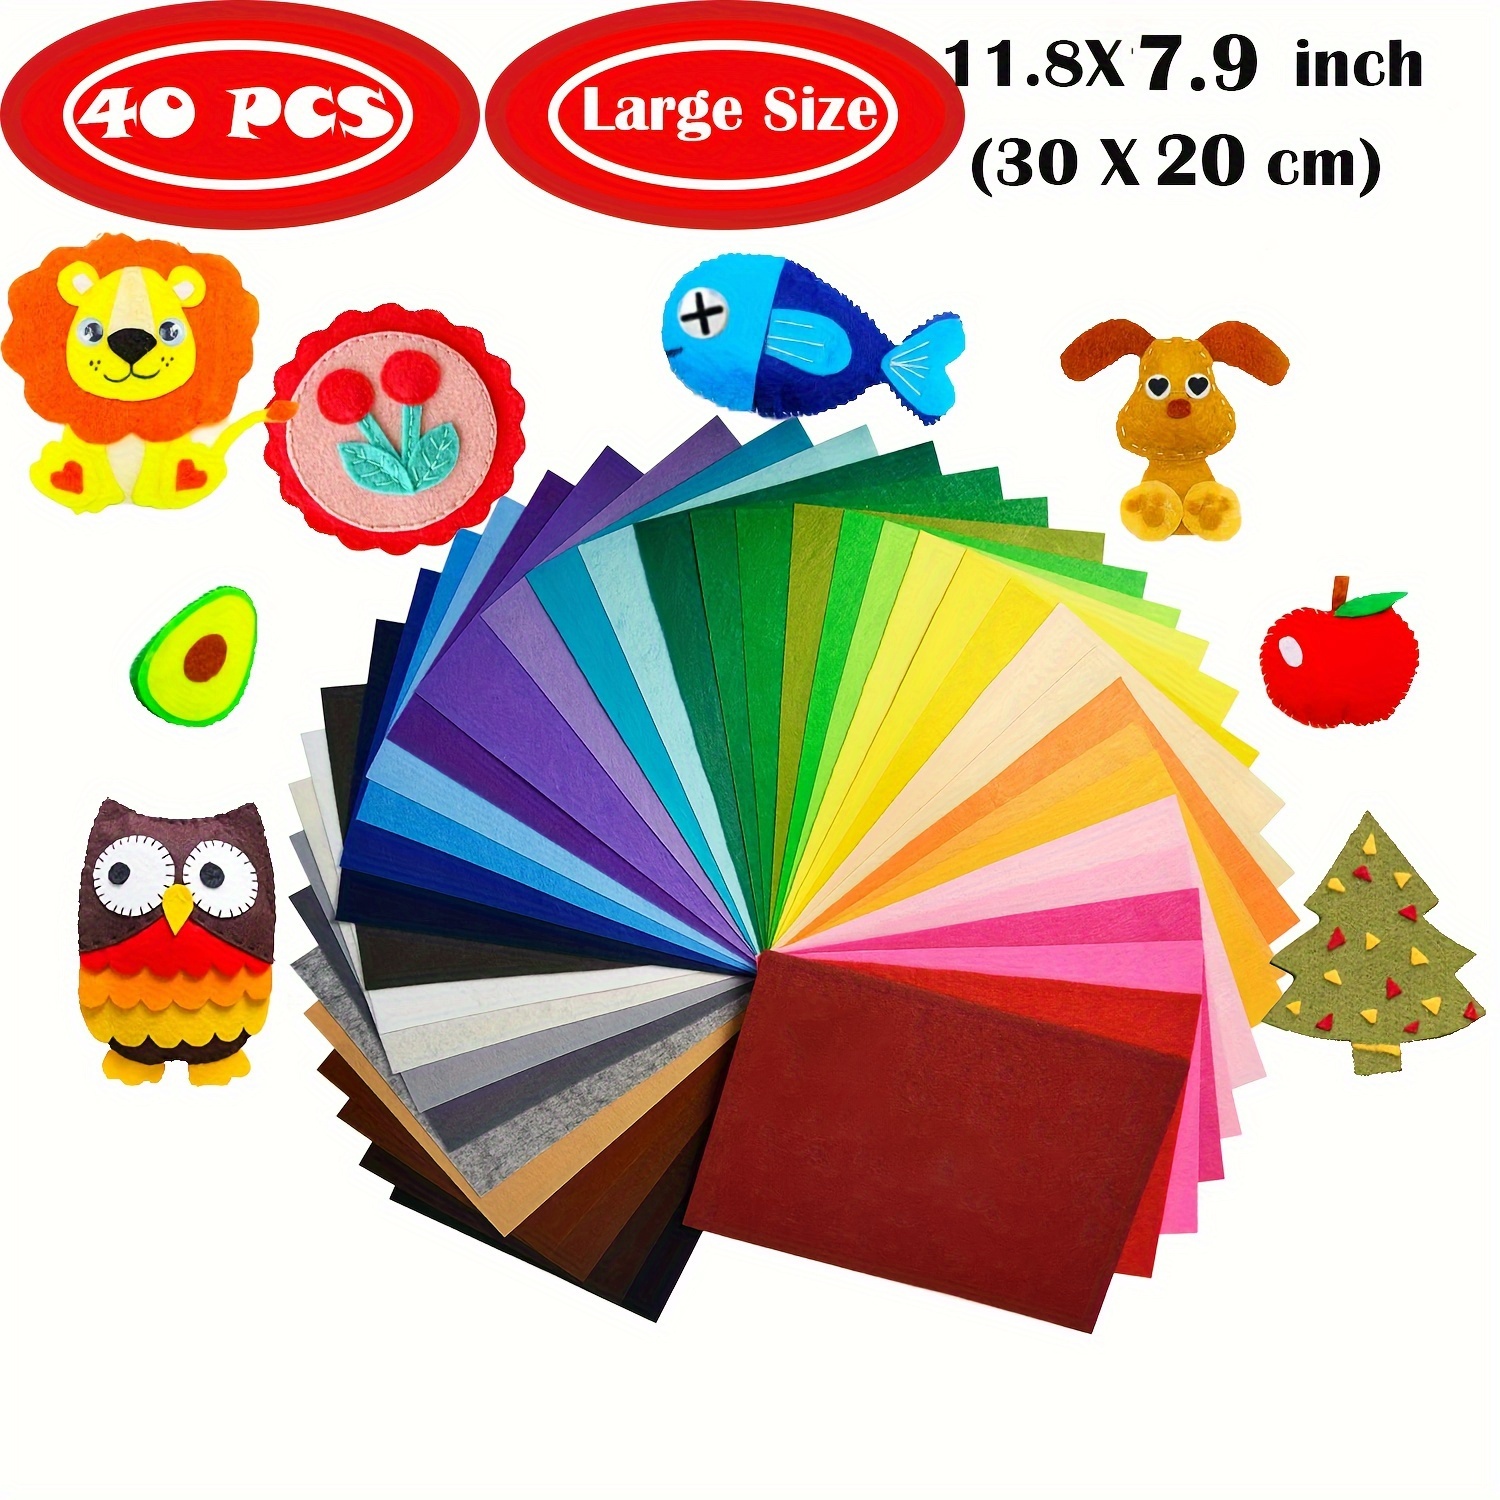 

Piece Of 20/40 - Extra Large 11.8"x7.9" Multicolor Craft Felt Sheets - Thick & Durable For Diy Projects, Sewing, Patchwork, And Decorations